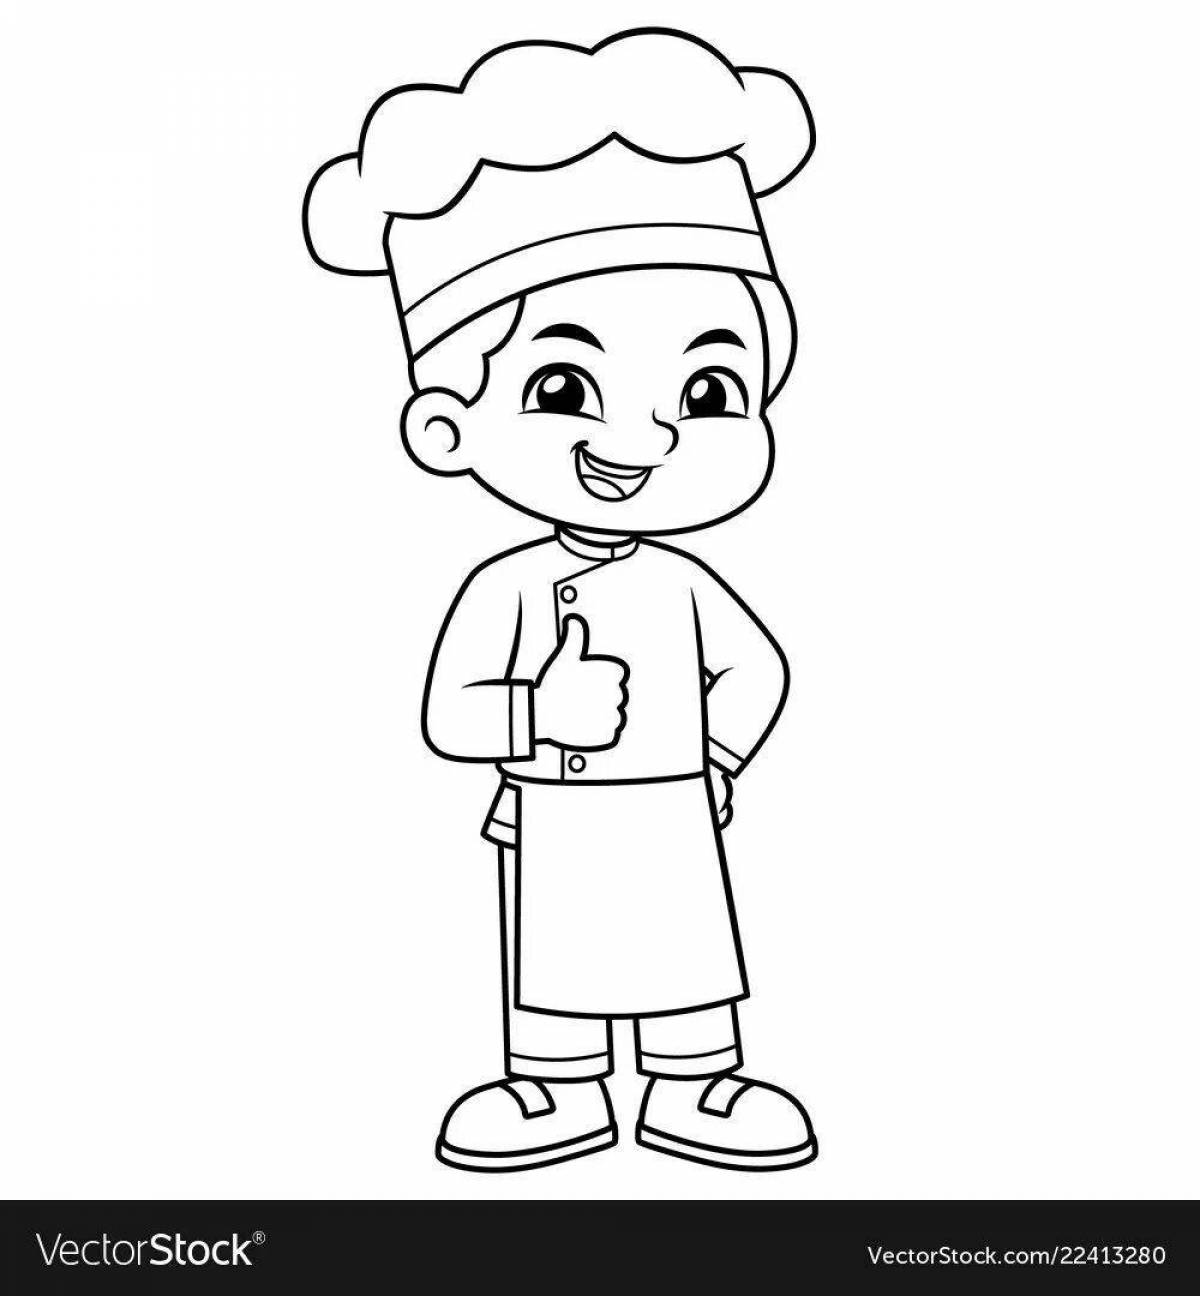 Chef bright coloring page